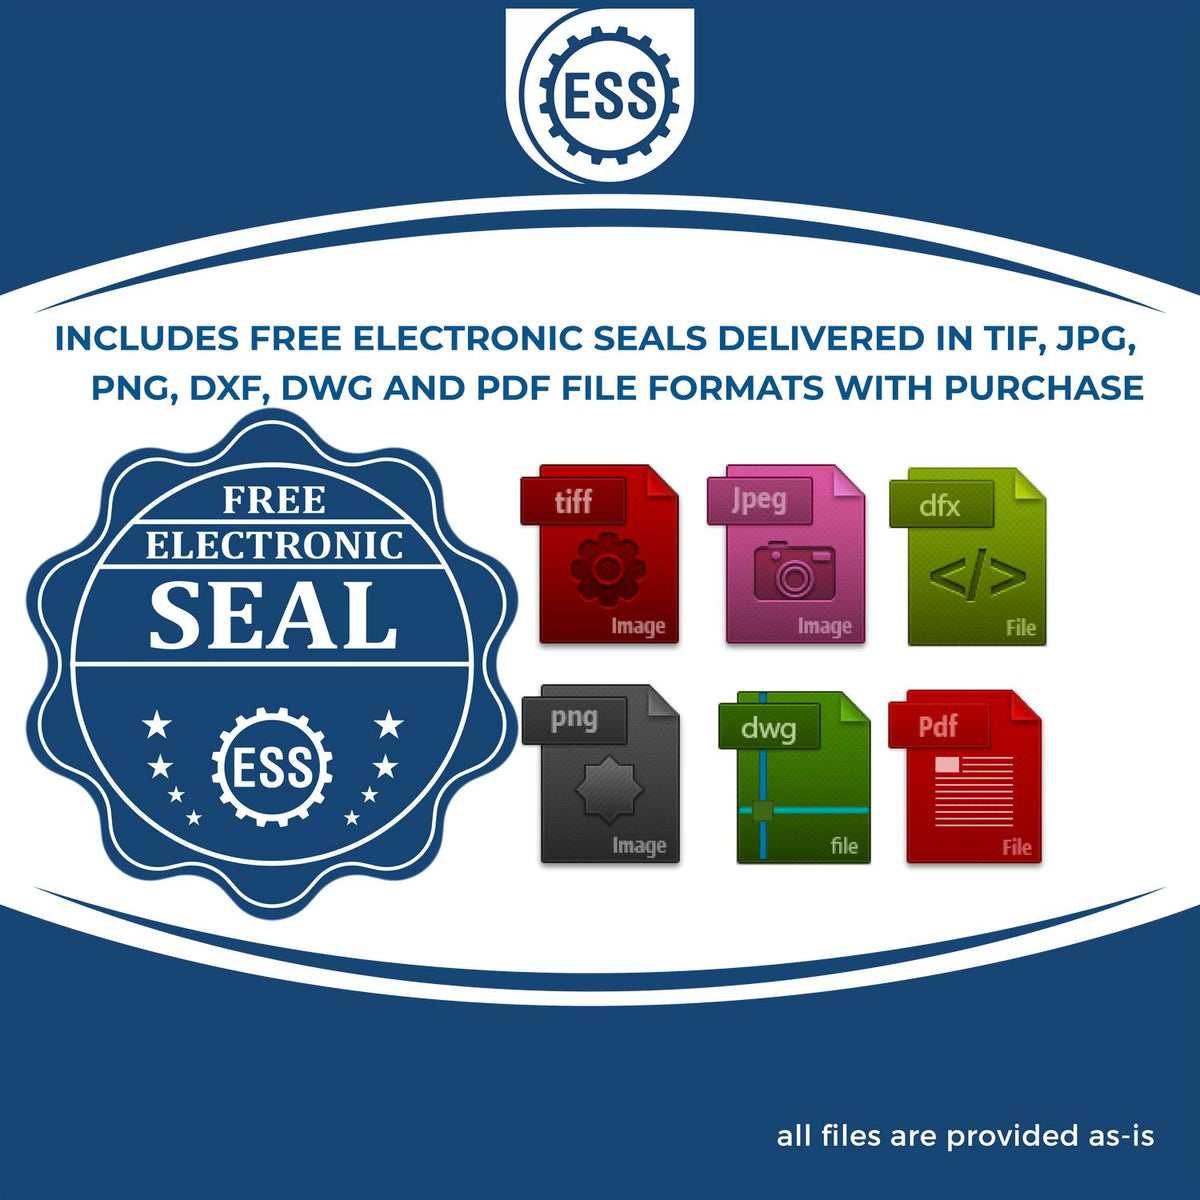 An infographic for the free electronic seal for the Hybrid Nevada Land Surveyor Seal illustrating the different file type icons such as DXF, DWG, TIF, JPG and PNG.